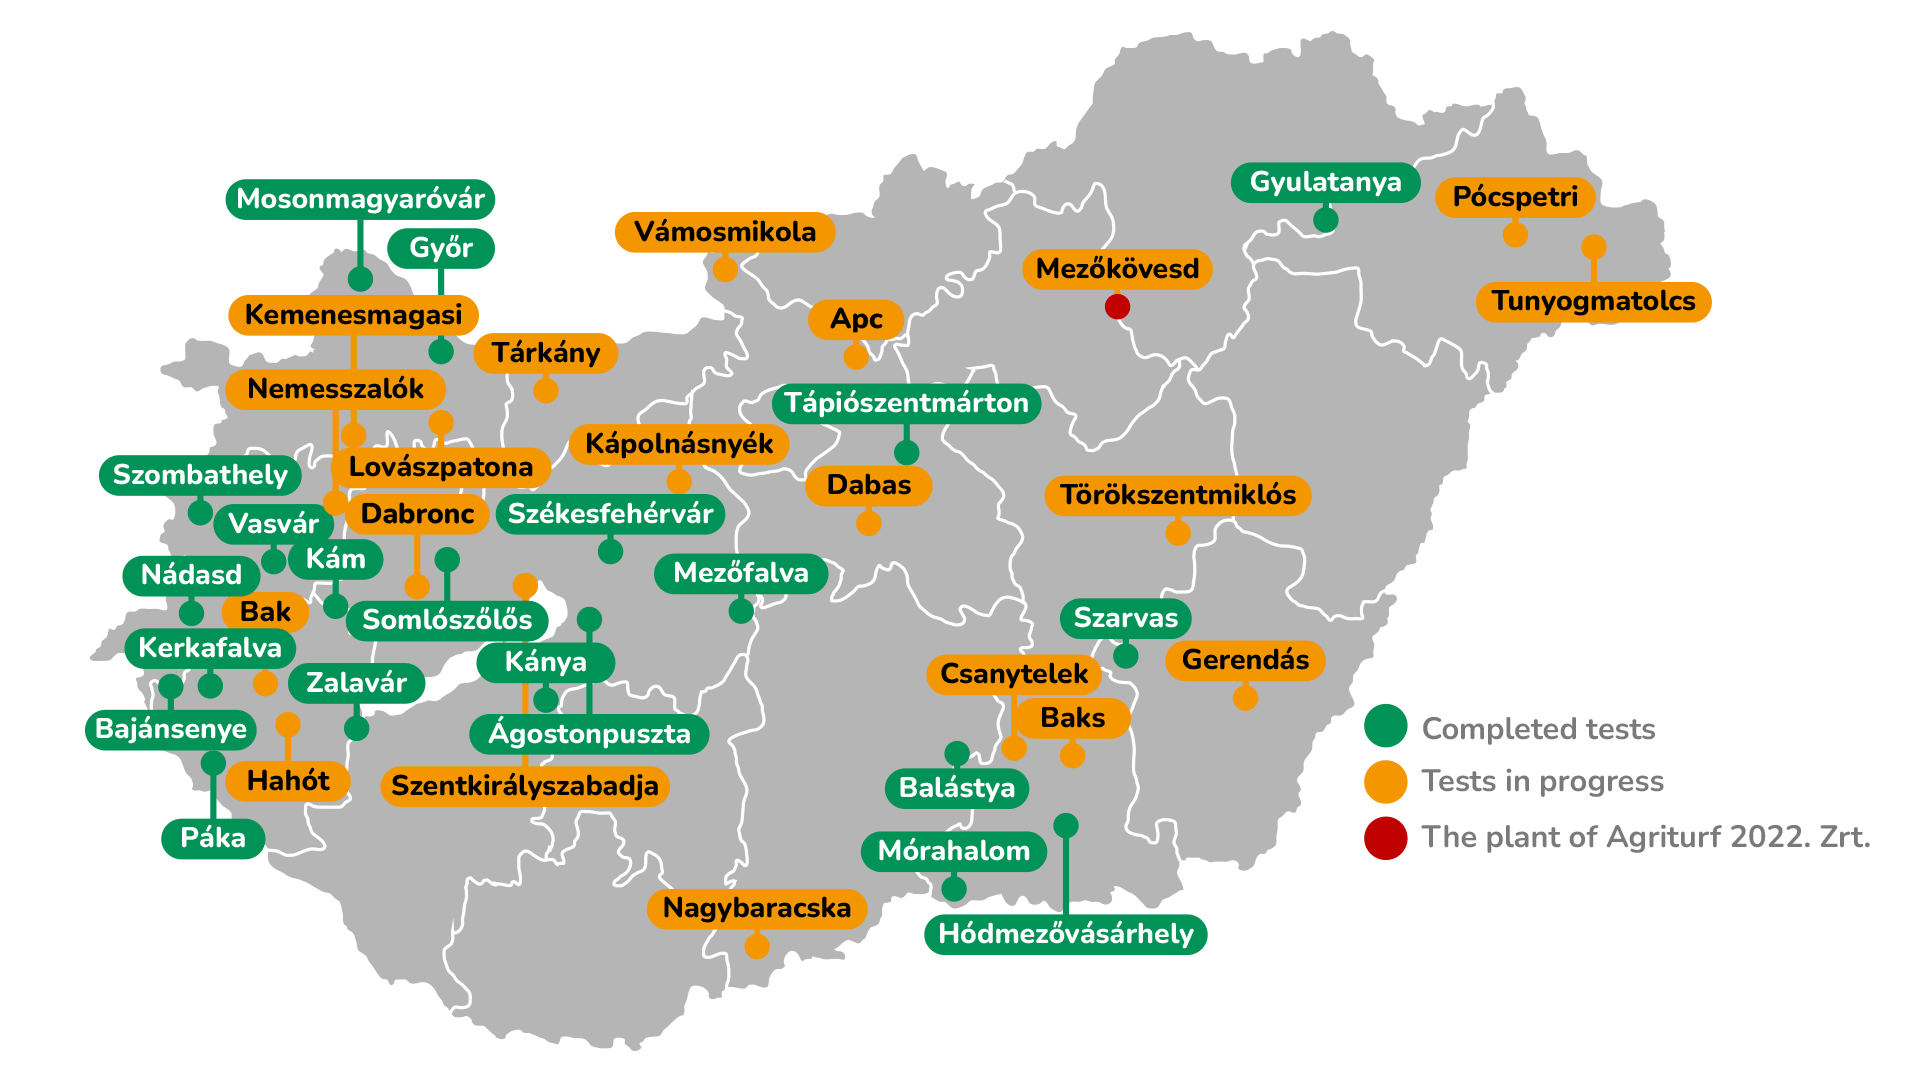 Trial sites in Hungary